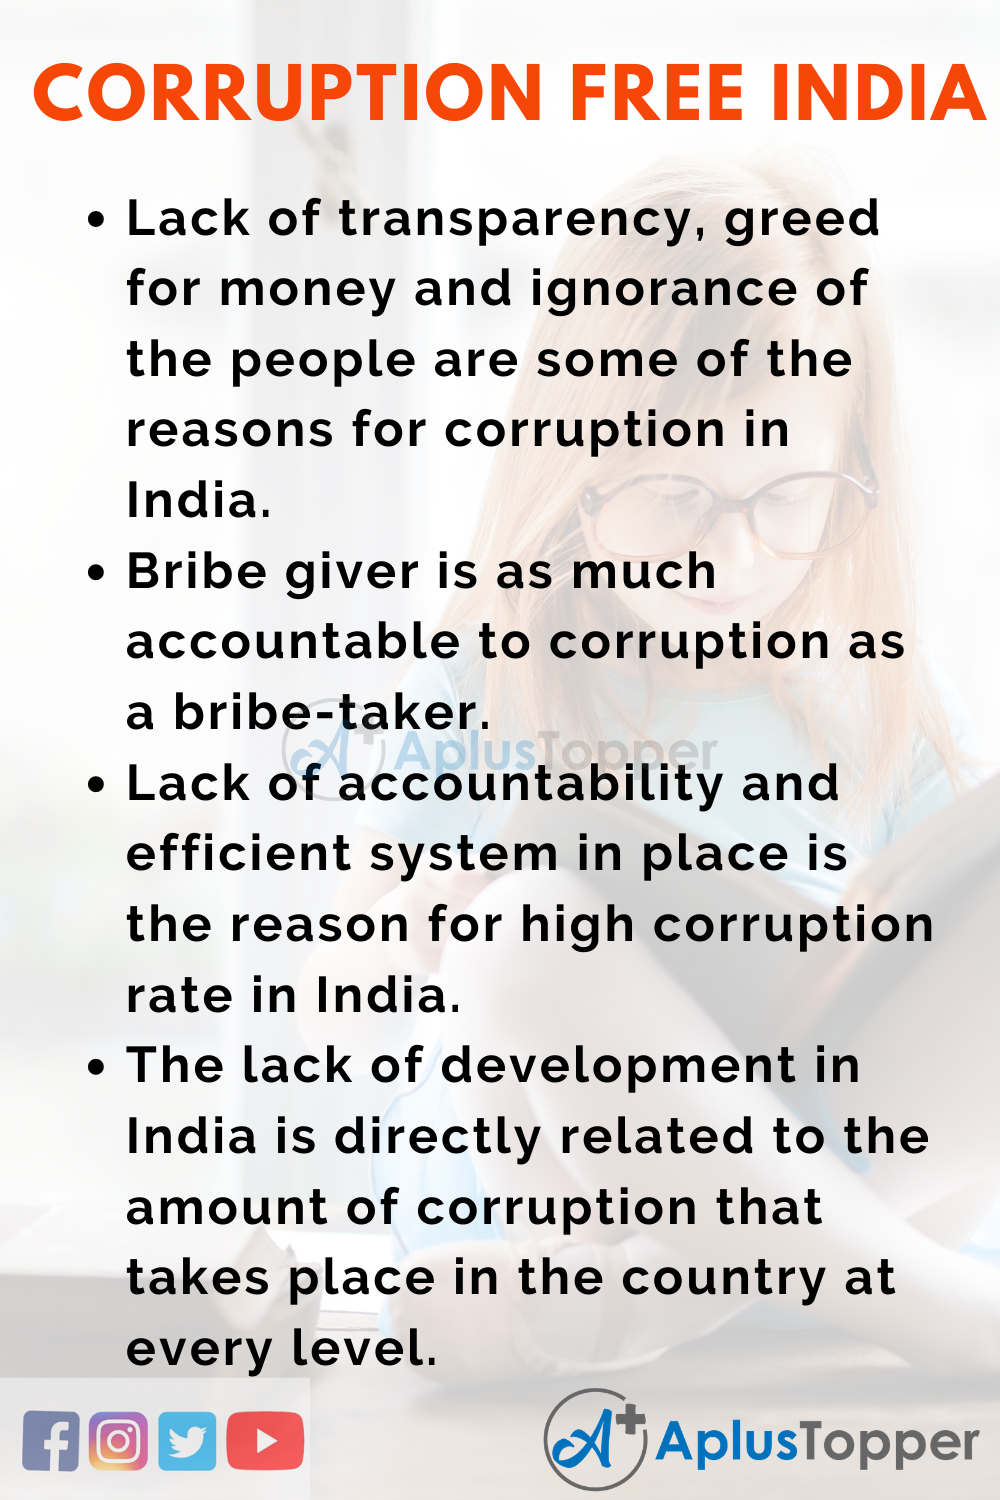 essay on corruption free india for developed nation in english